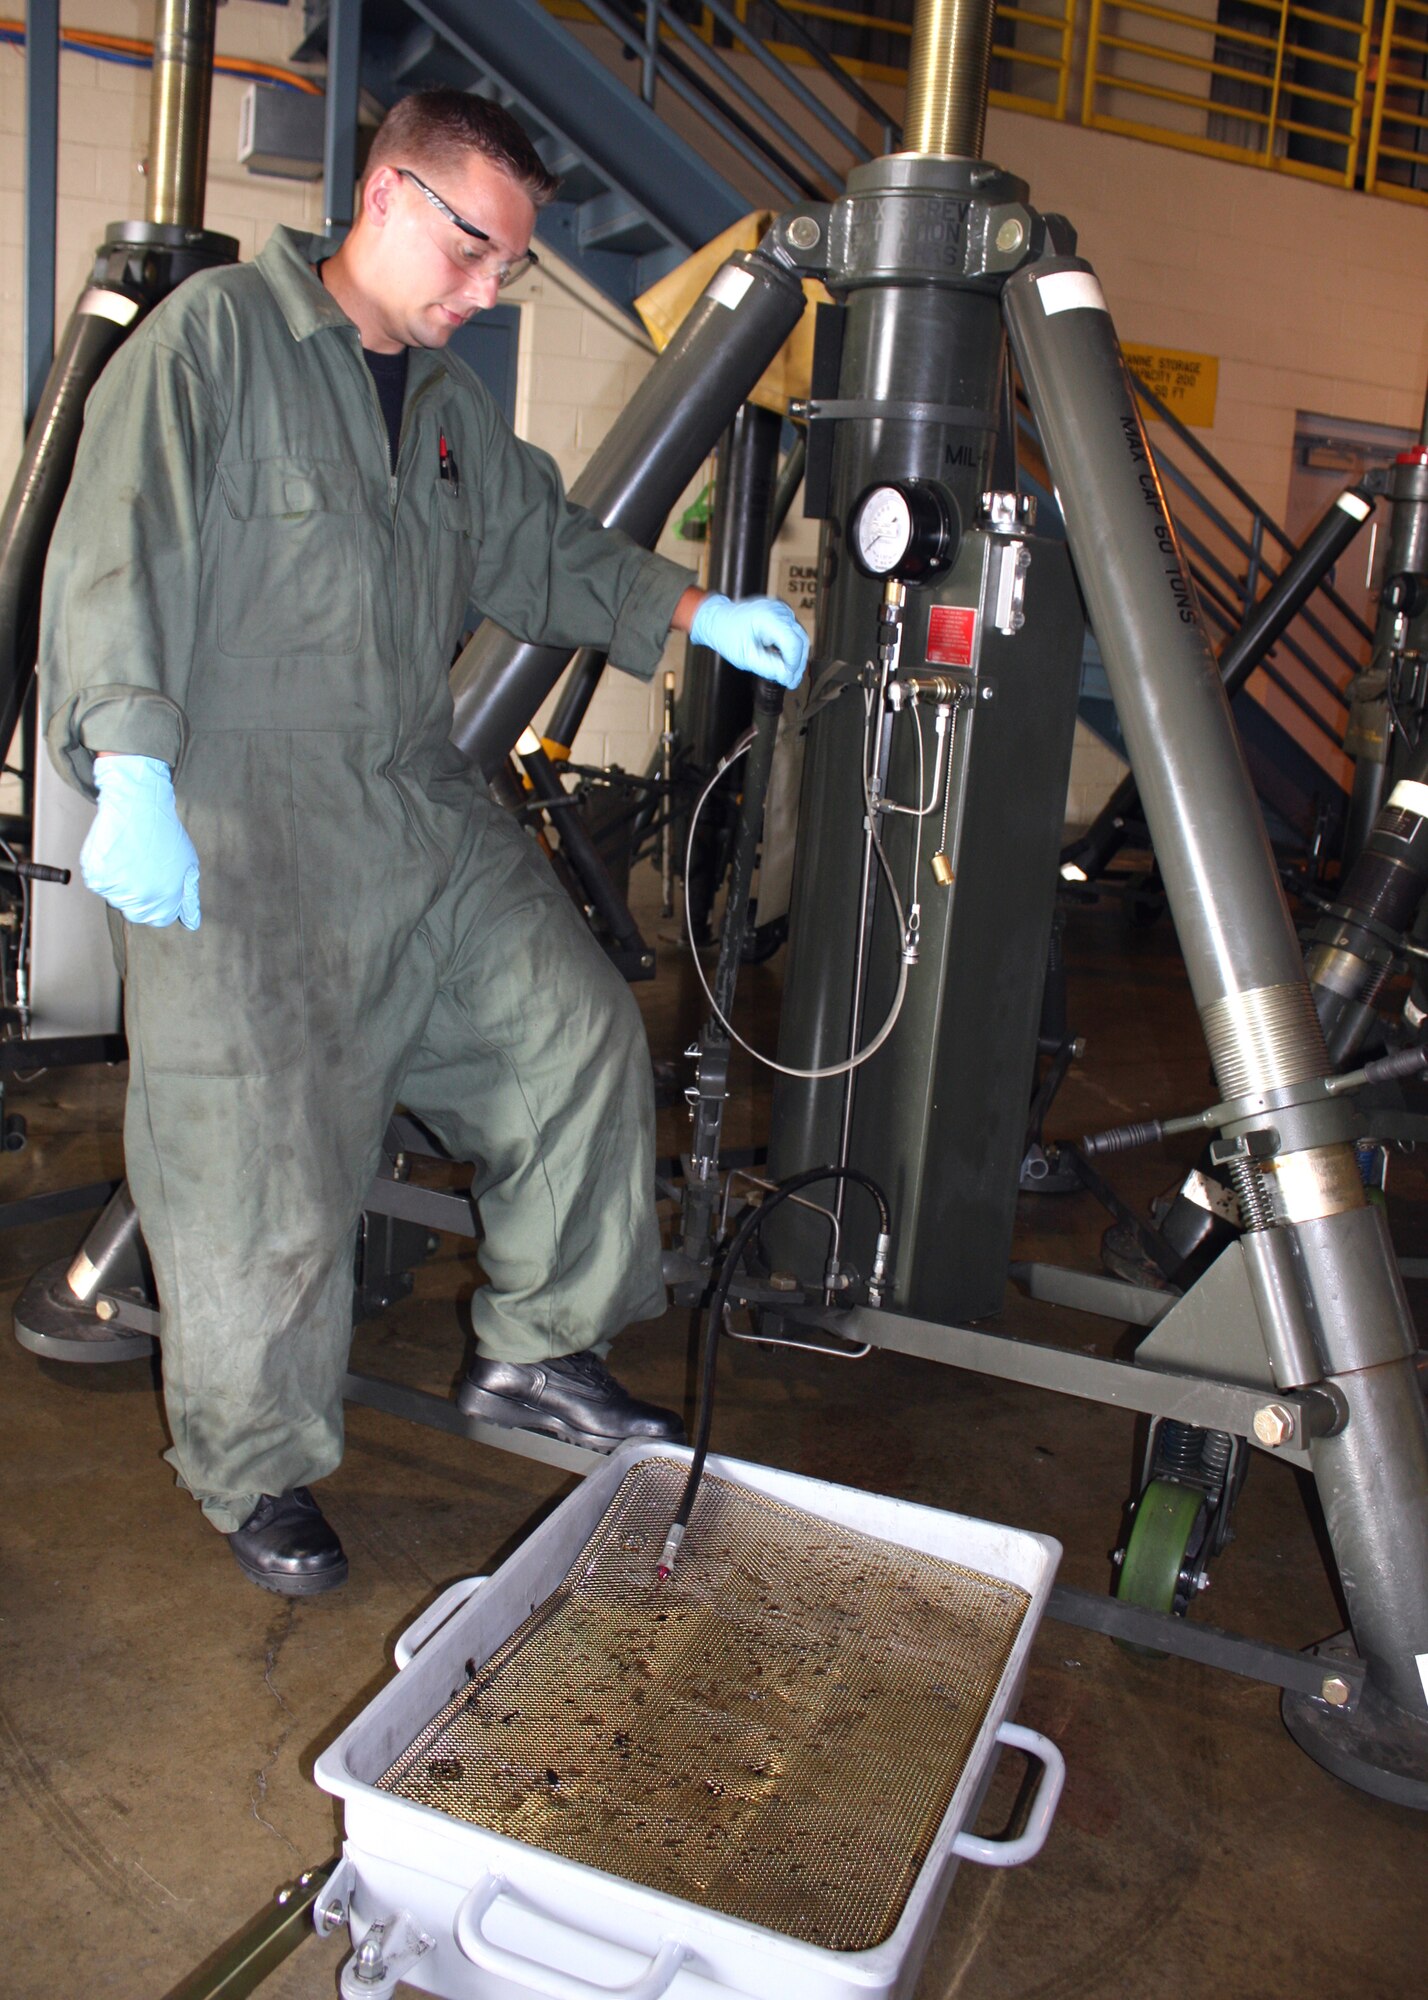 WRIGHT-PATTERSON AIR FORCE BASE, Ohio – Staff Sgt. Joe Edwards, 445th Maintenance Squadron aerospace ground equipment mechanic, drains hydraulic fluid from a 60 ton aircraft jack. Sergeant Edwards identified a cracked weld on the hydraulic tank, which will be repaired here on base. (U. S. Air Force photo/Staff Sgt. Ken LaRock)